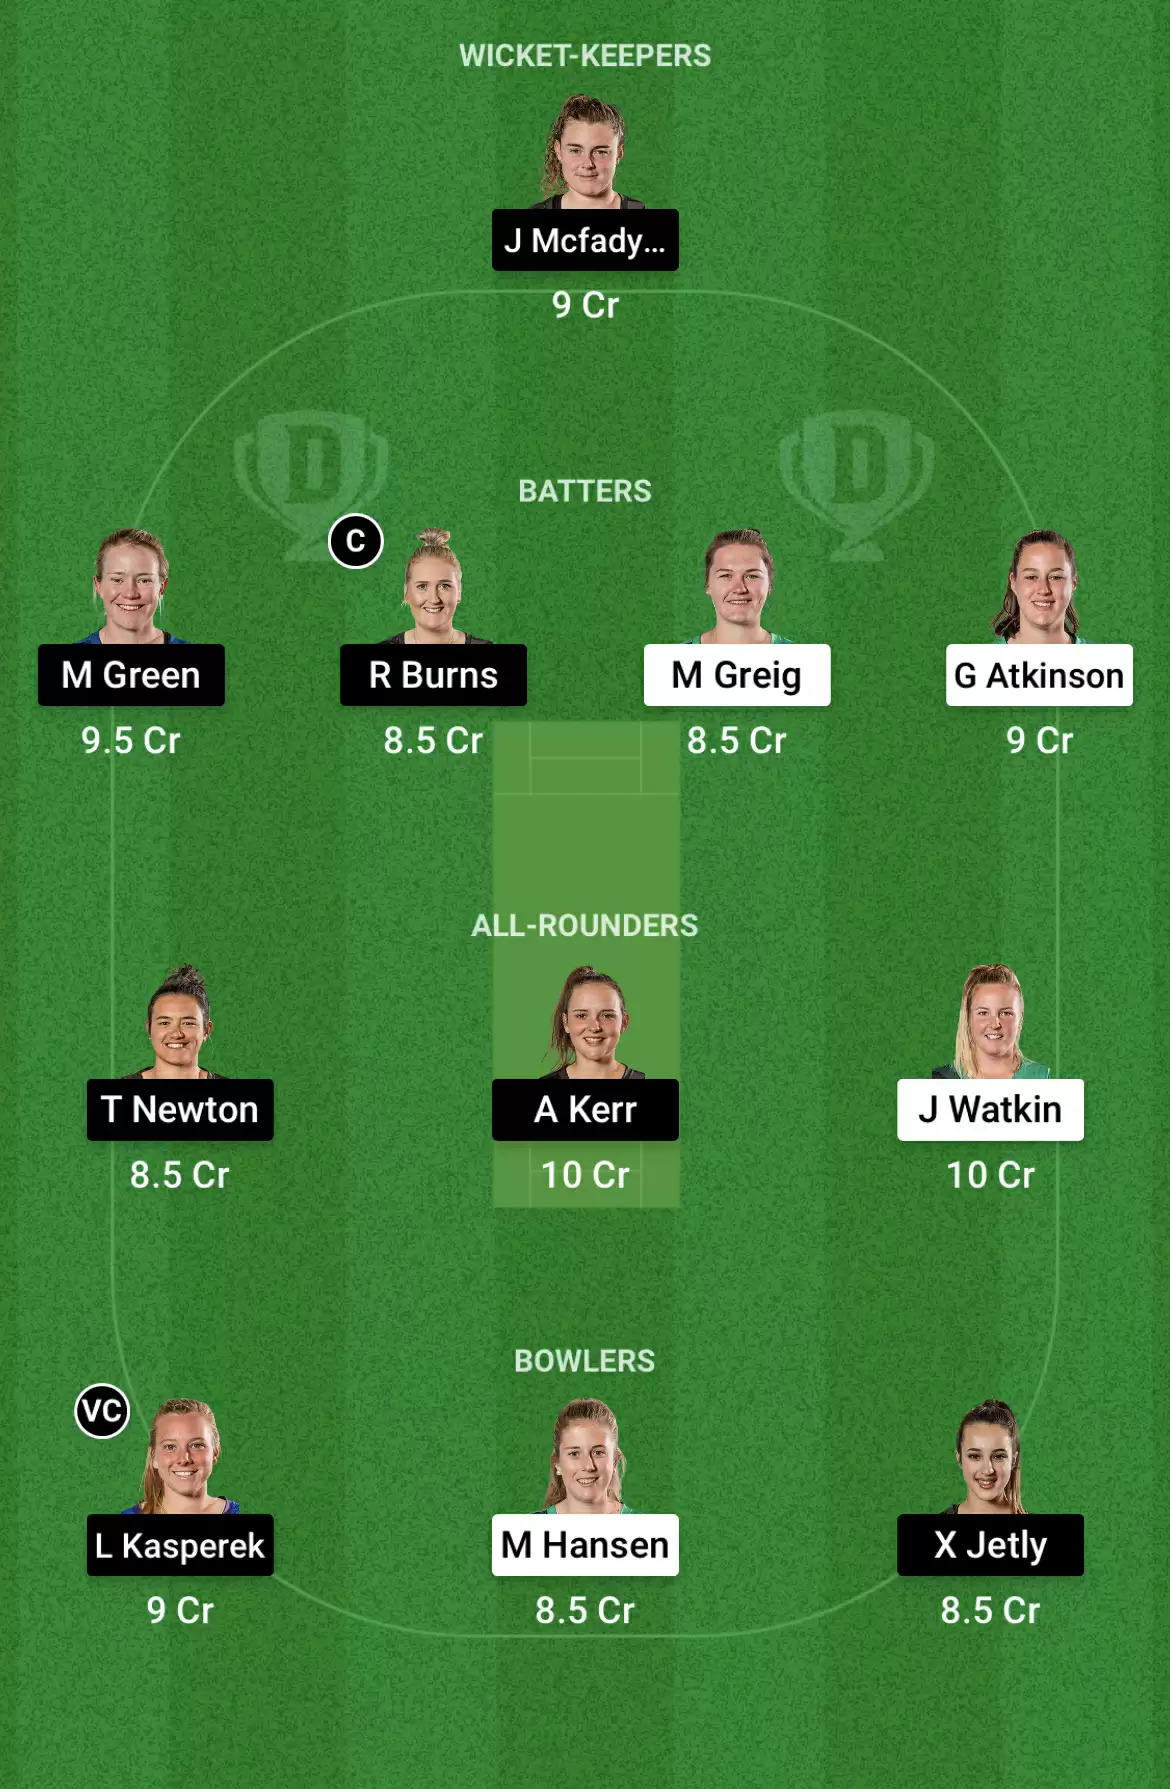 CH-W vs WB-W Dream11 Prediction for Women’s Super Smash T20 2021/22: Playing XI, Fantasy Cricket Tips, Team, Weather Updates and Pitch Report